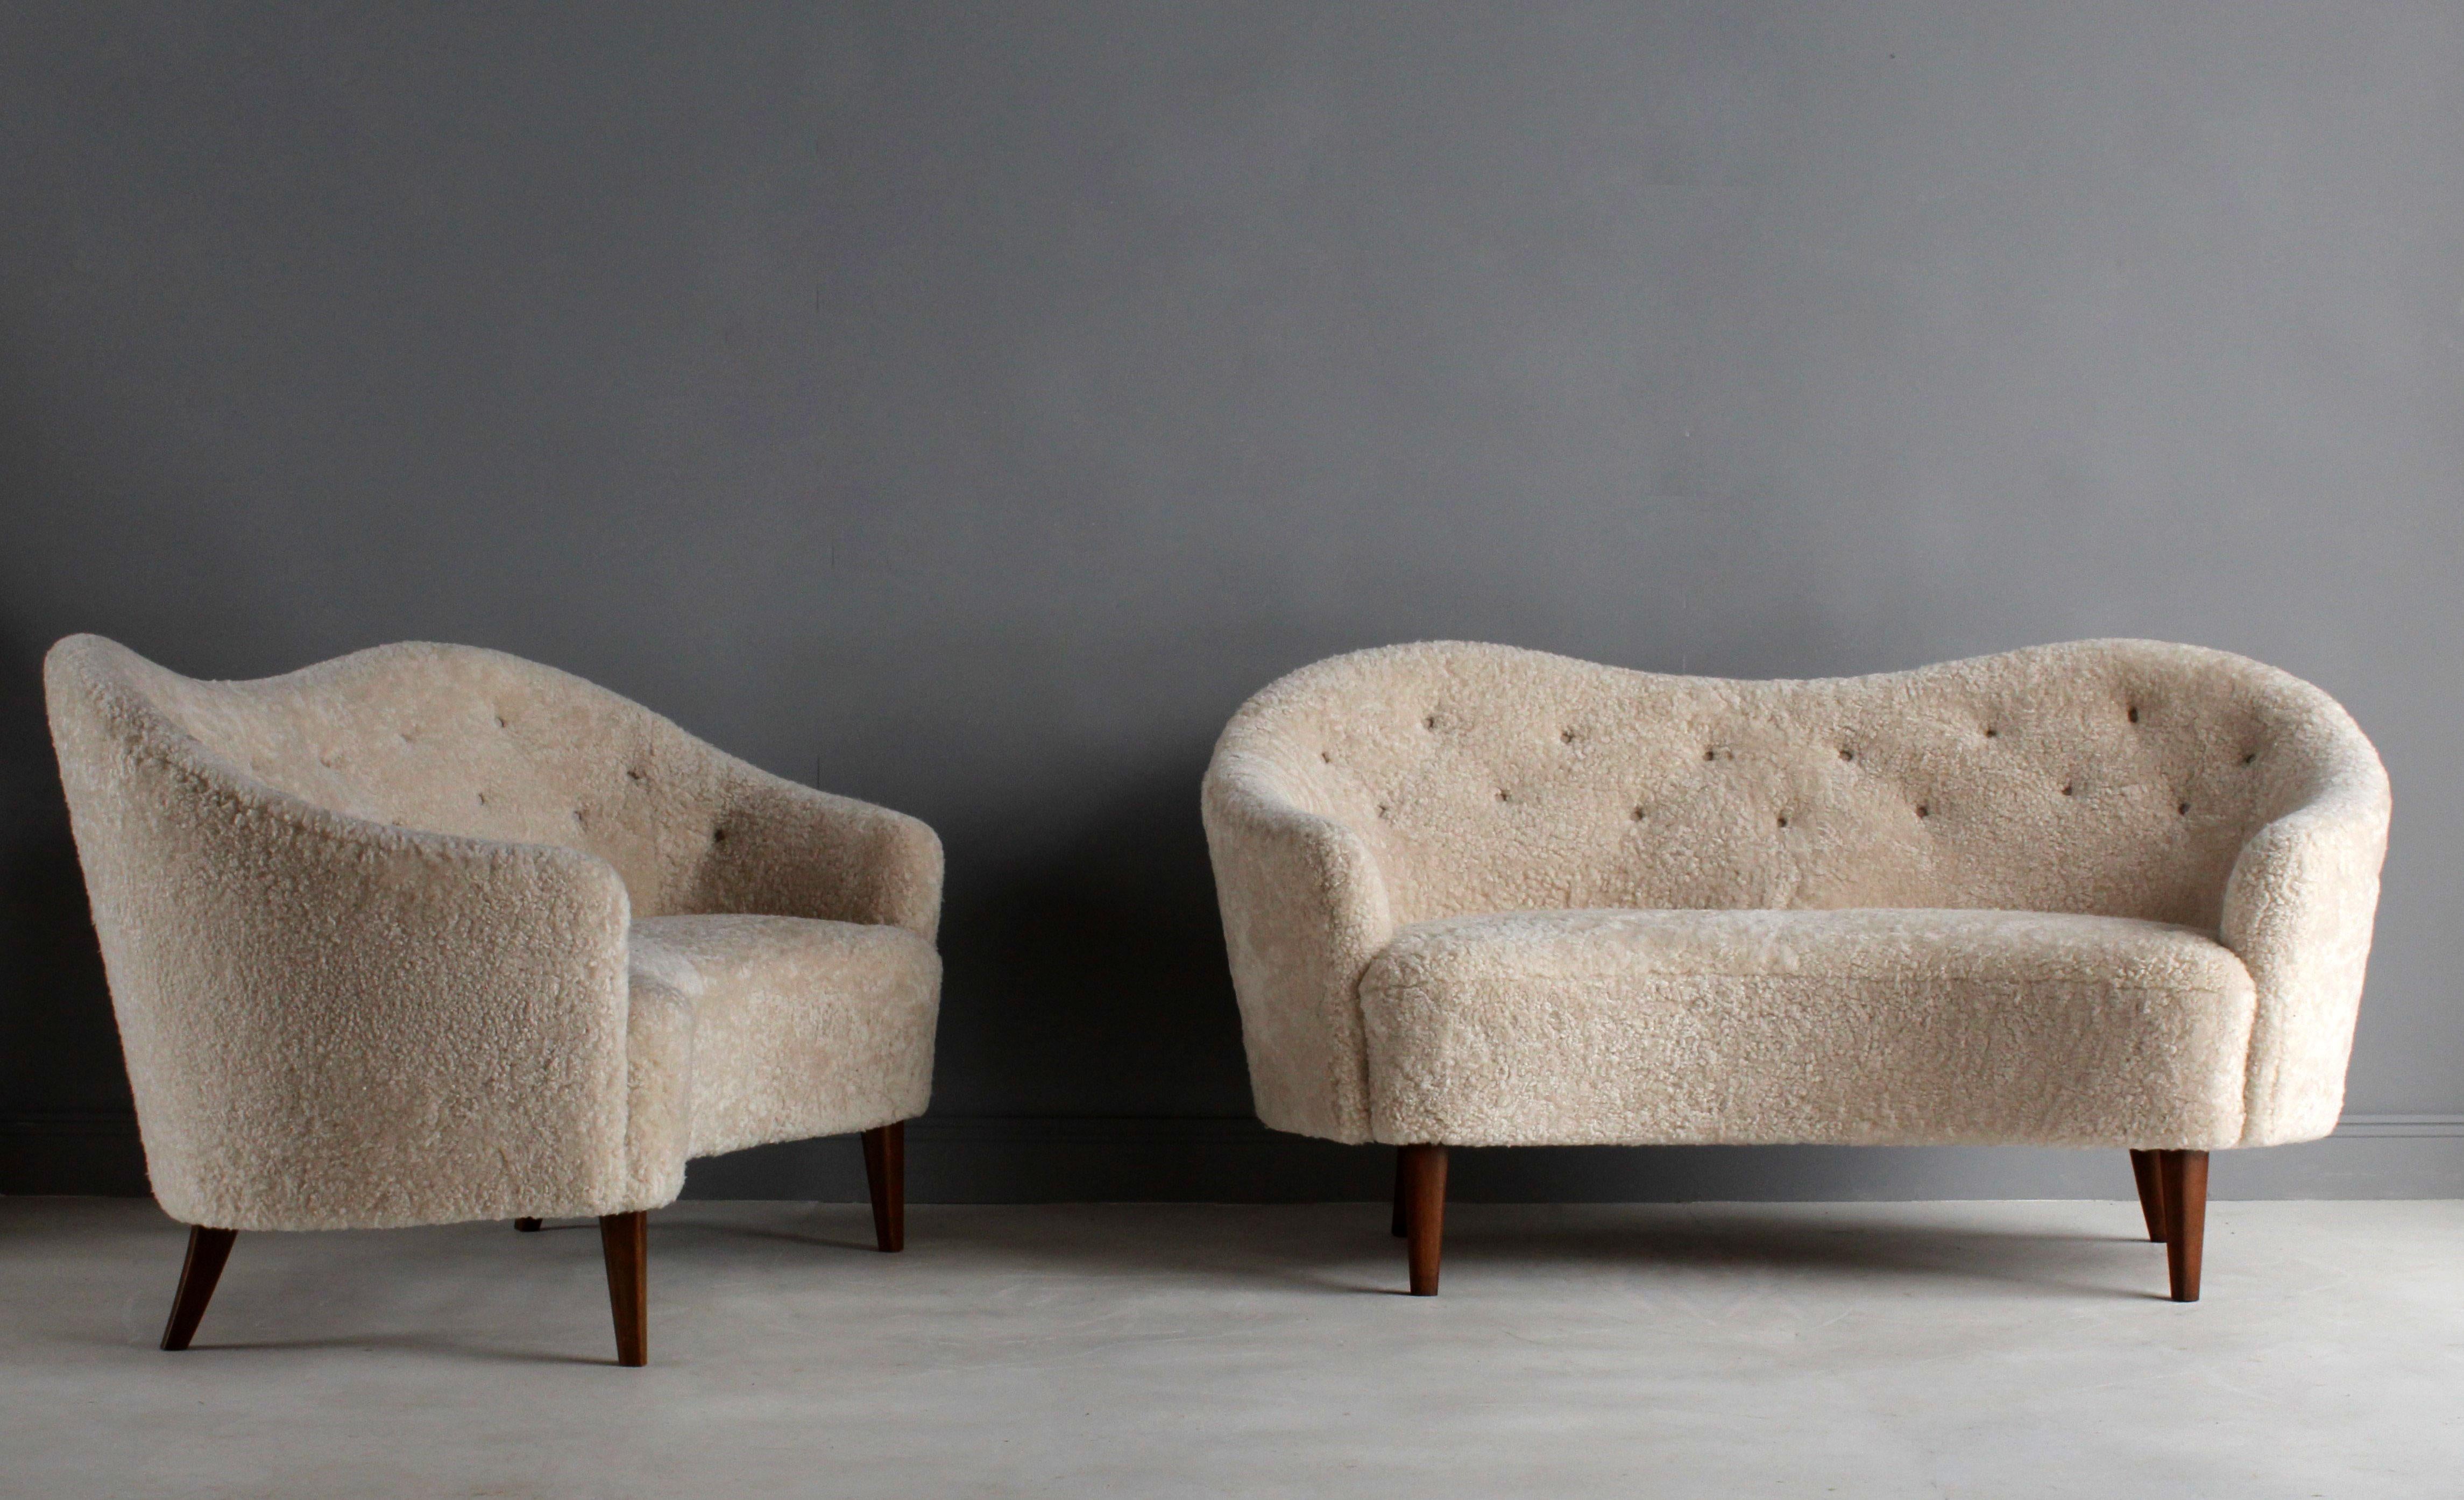 A pair of sofas/love seats attributed to Nanna Ditzel. Soft organic forms are further enhanced by the brand-new, authentic light beige/grey sheepskin upholstery. Mounted on stained beech legs.

The last image illustrates a pair of sofas documented